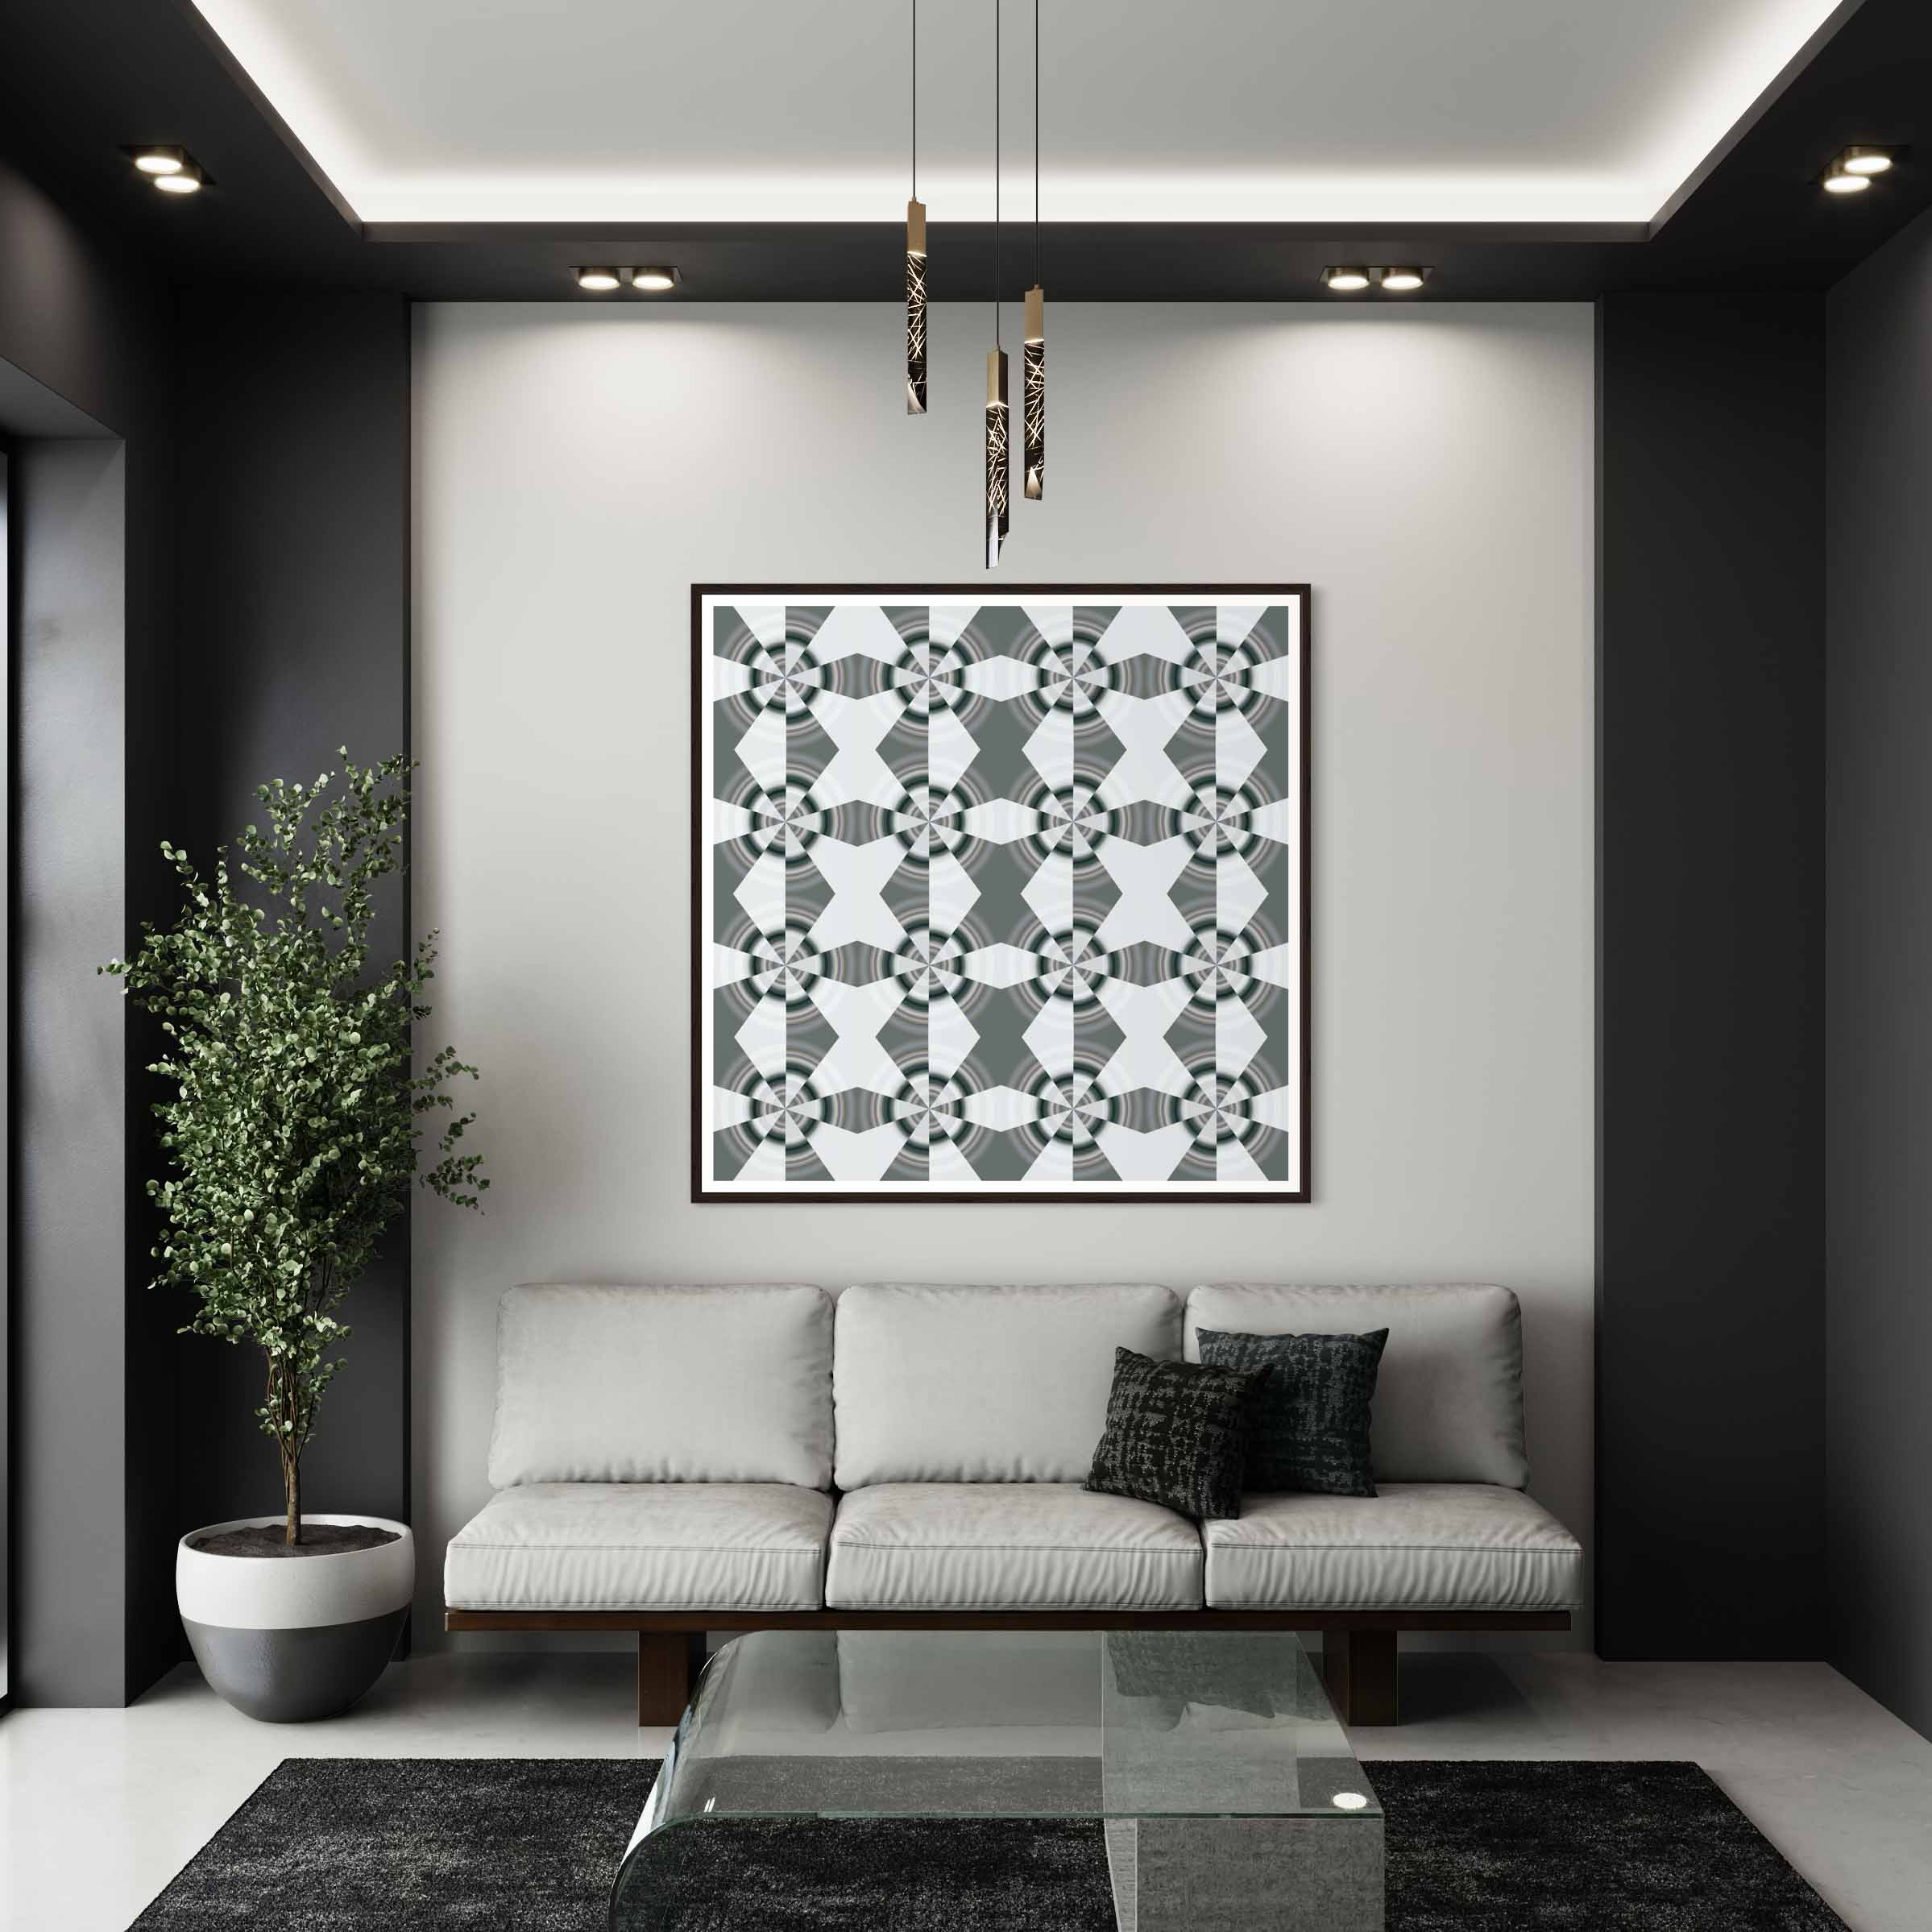 A living room with white furniture and black walls.